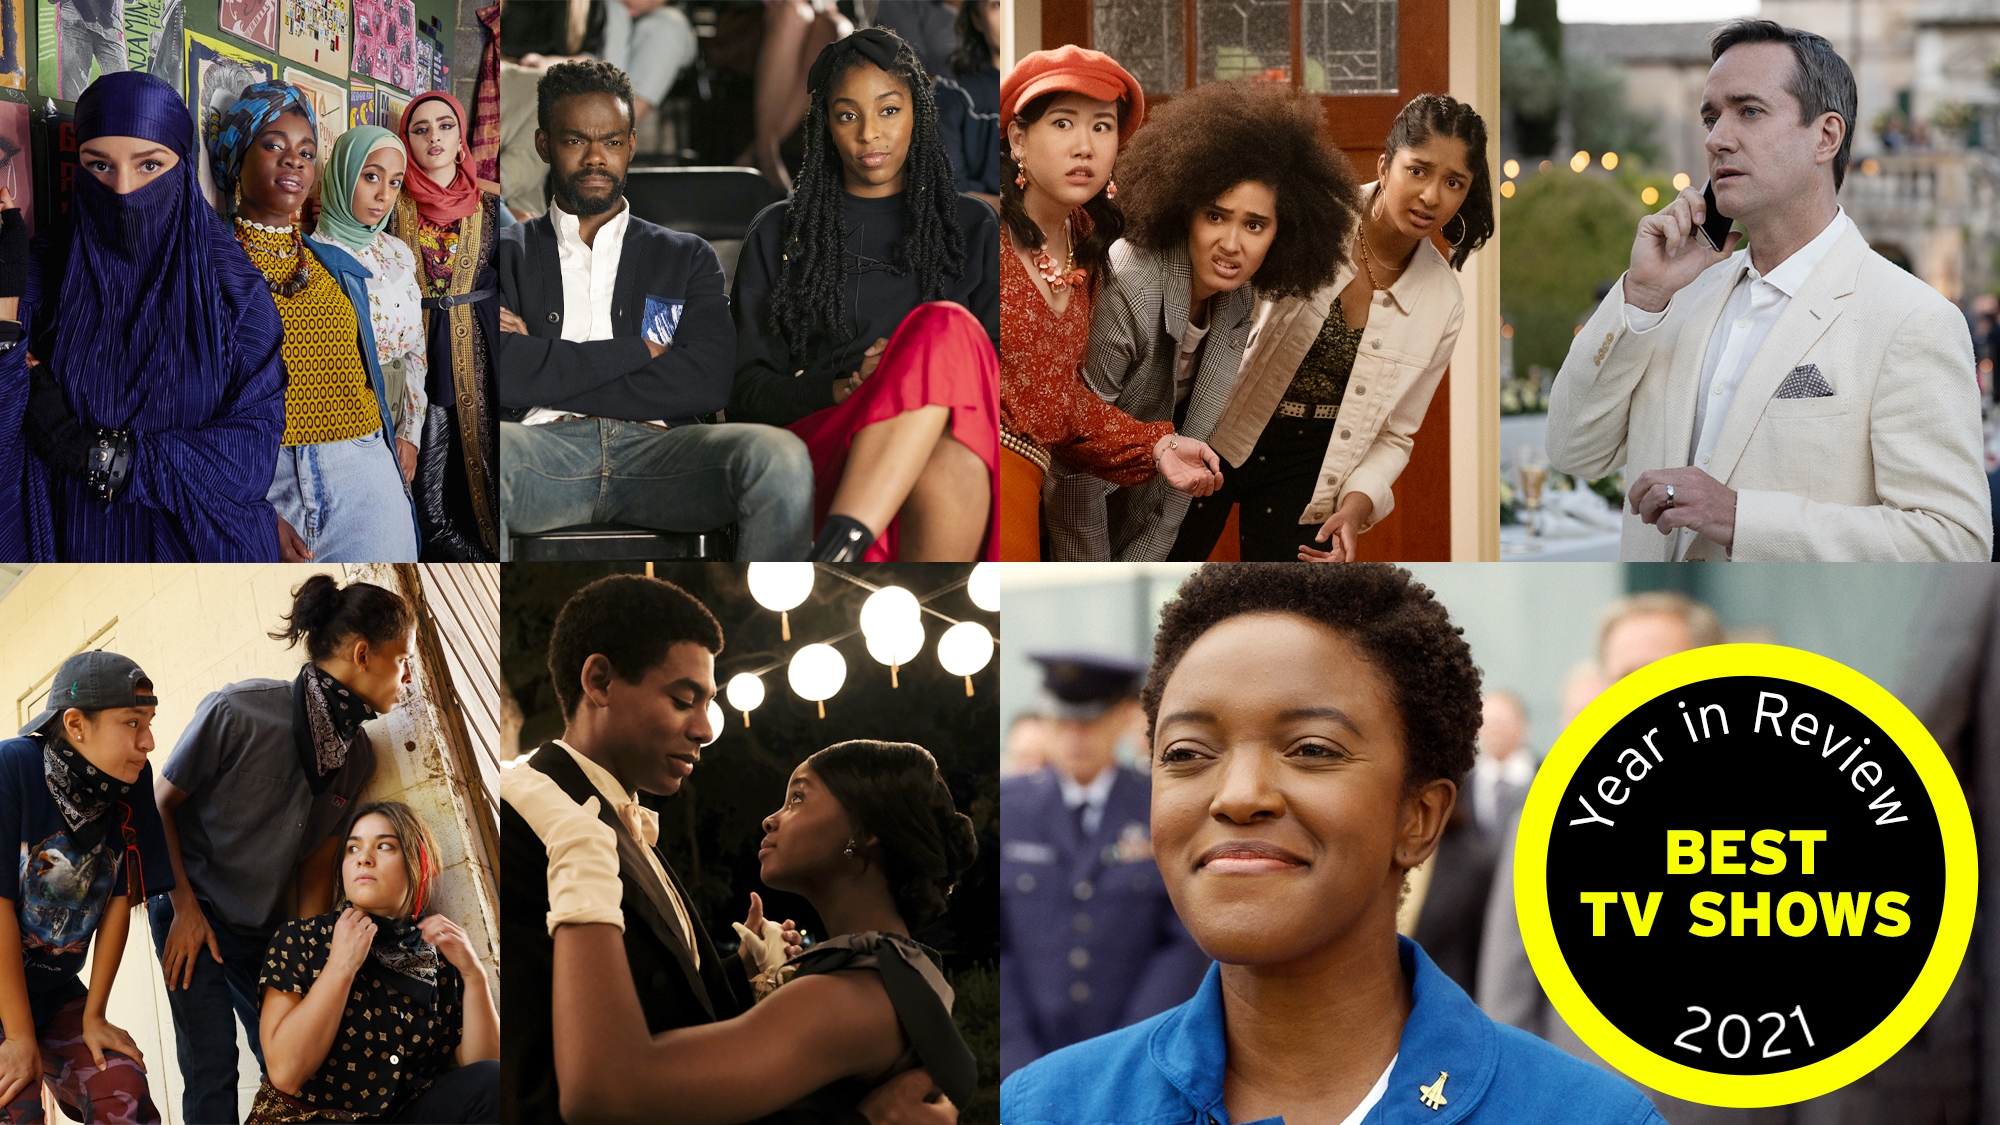 The 25 best TV shows of 2021